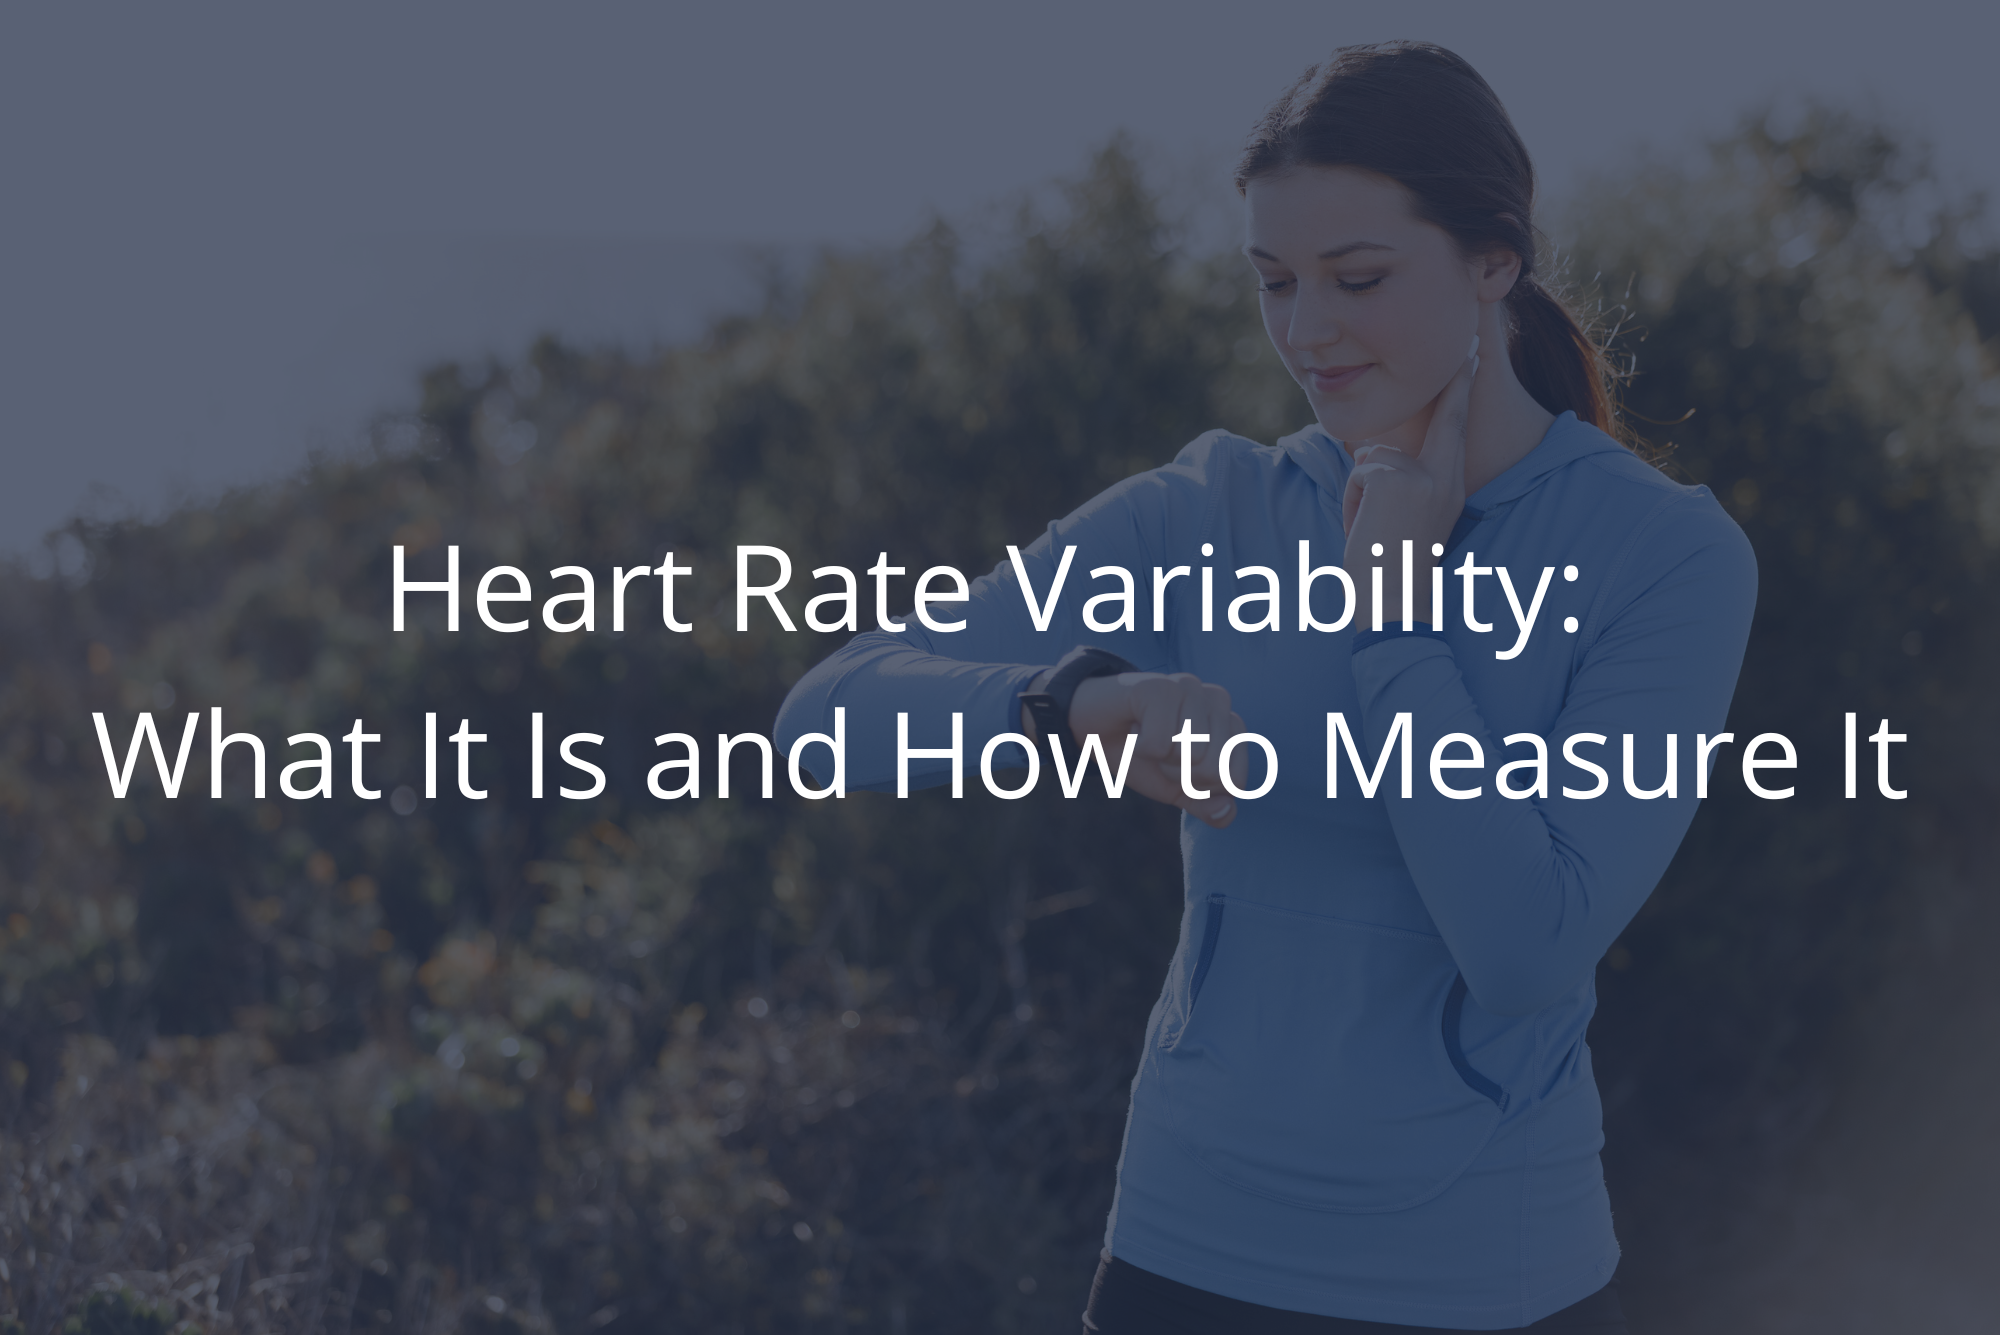 Woman checking heart rate wondering what is heart rate variability.